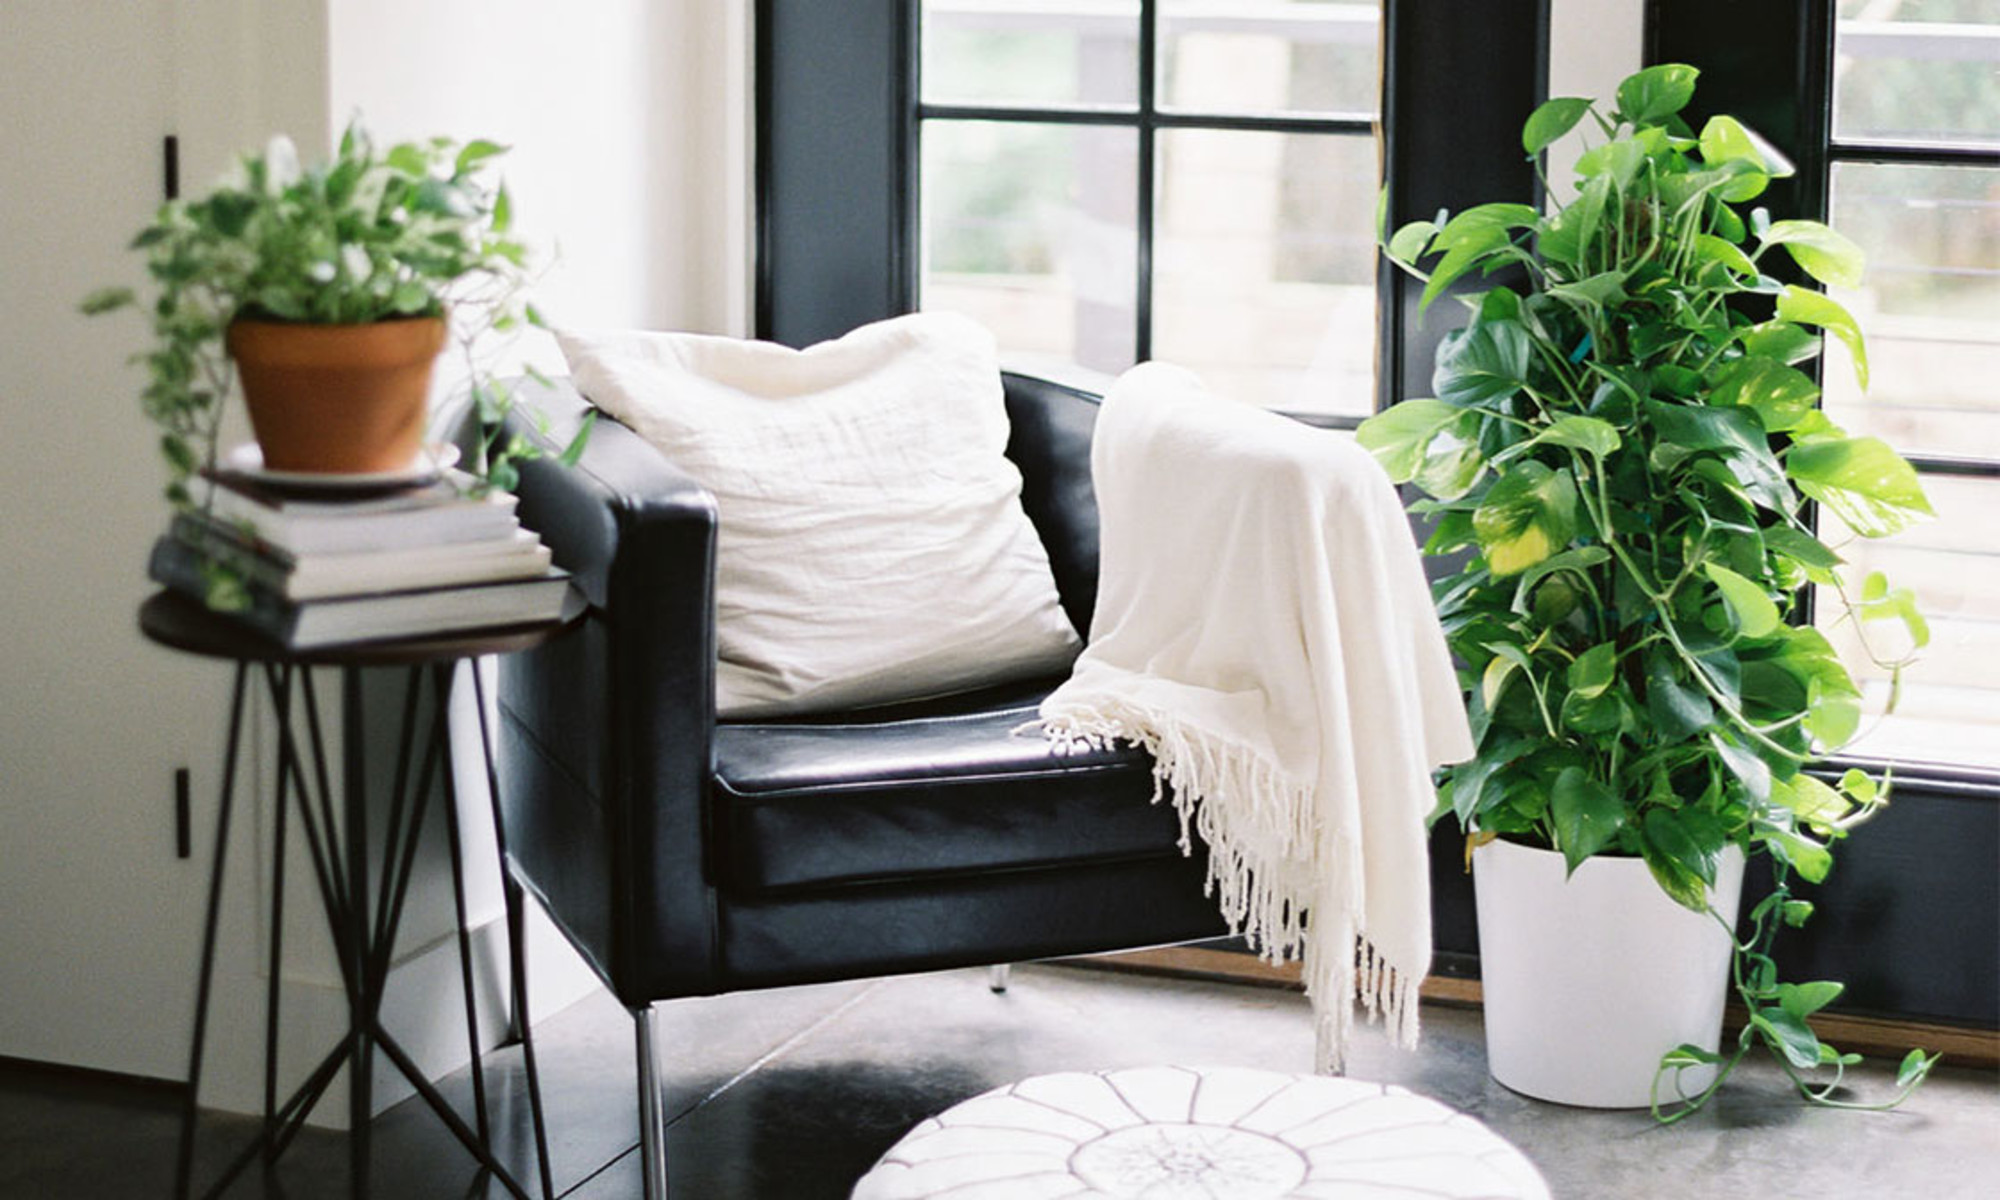 10 Easy Ways To Cleanse Your Home of Negative Energy | mindbodygreen